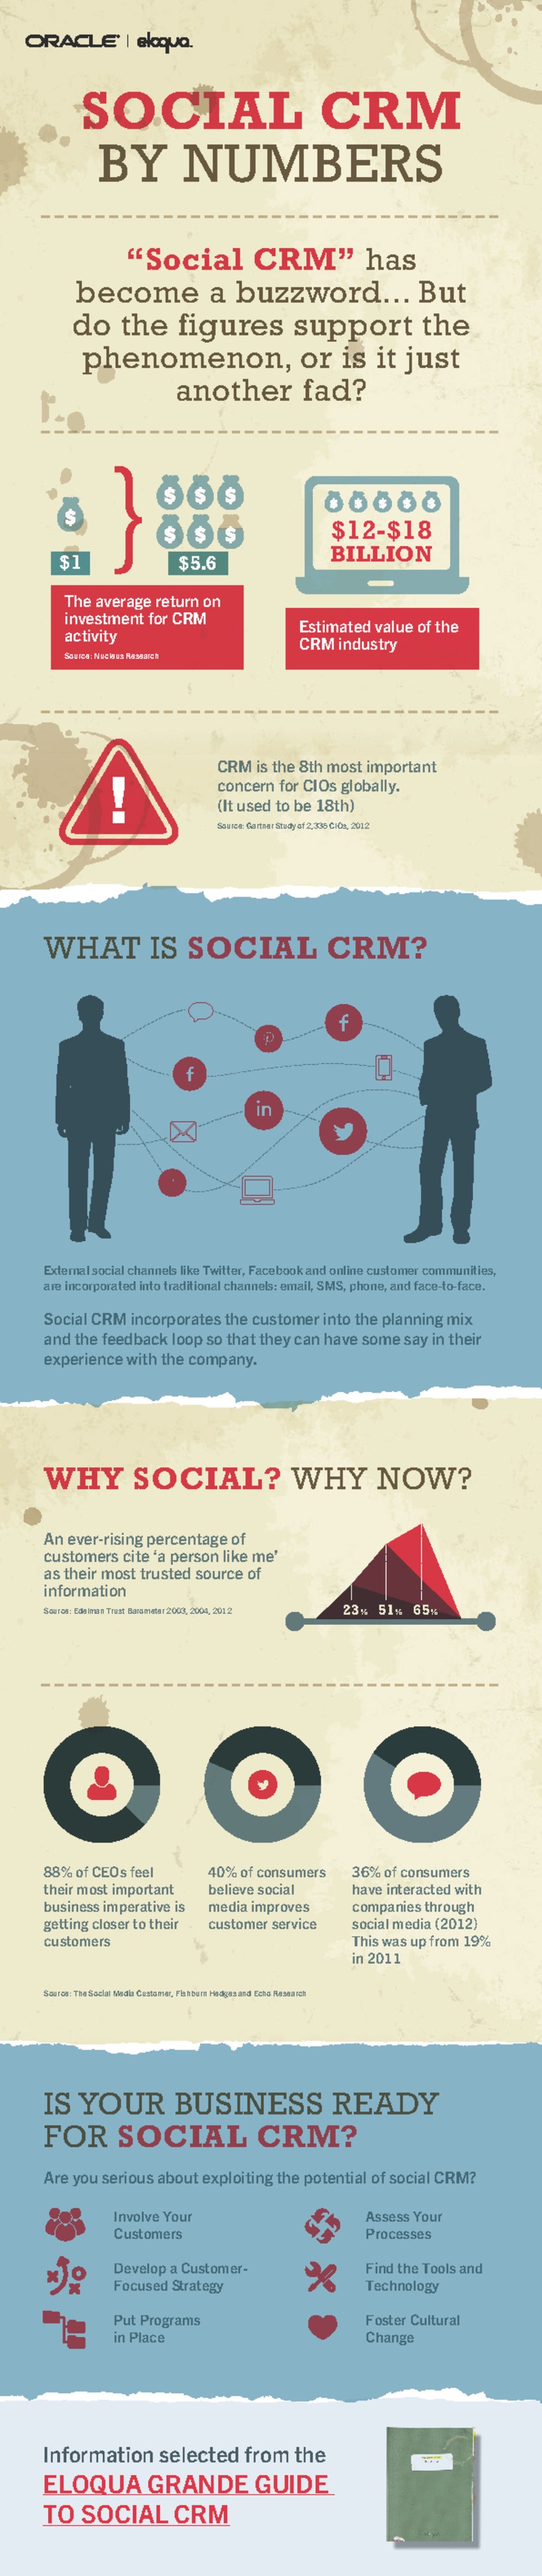 Social CRM by Numbers [Infographic] — Eloqua | The MarTech Digest | Scoop.it